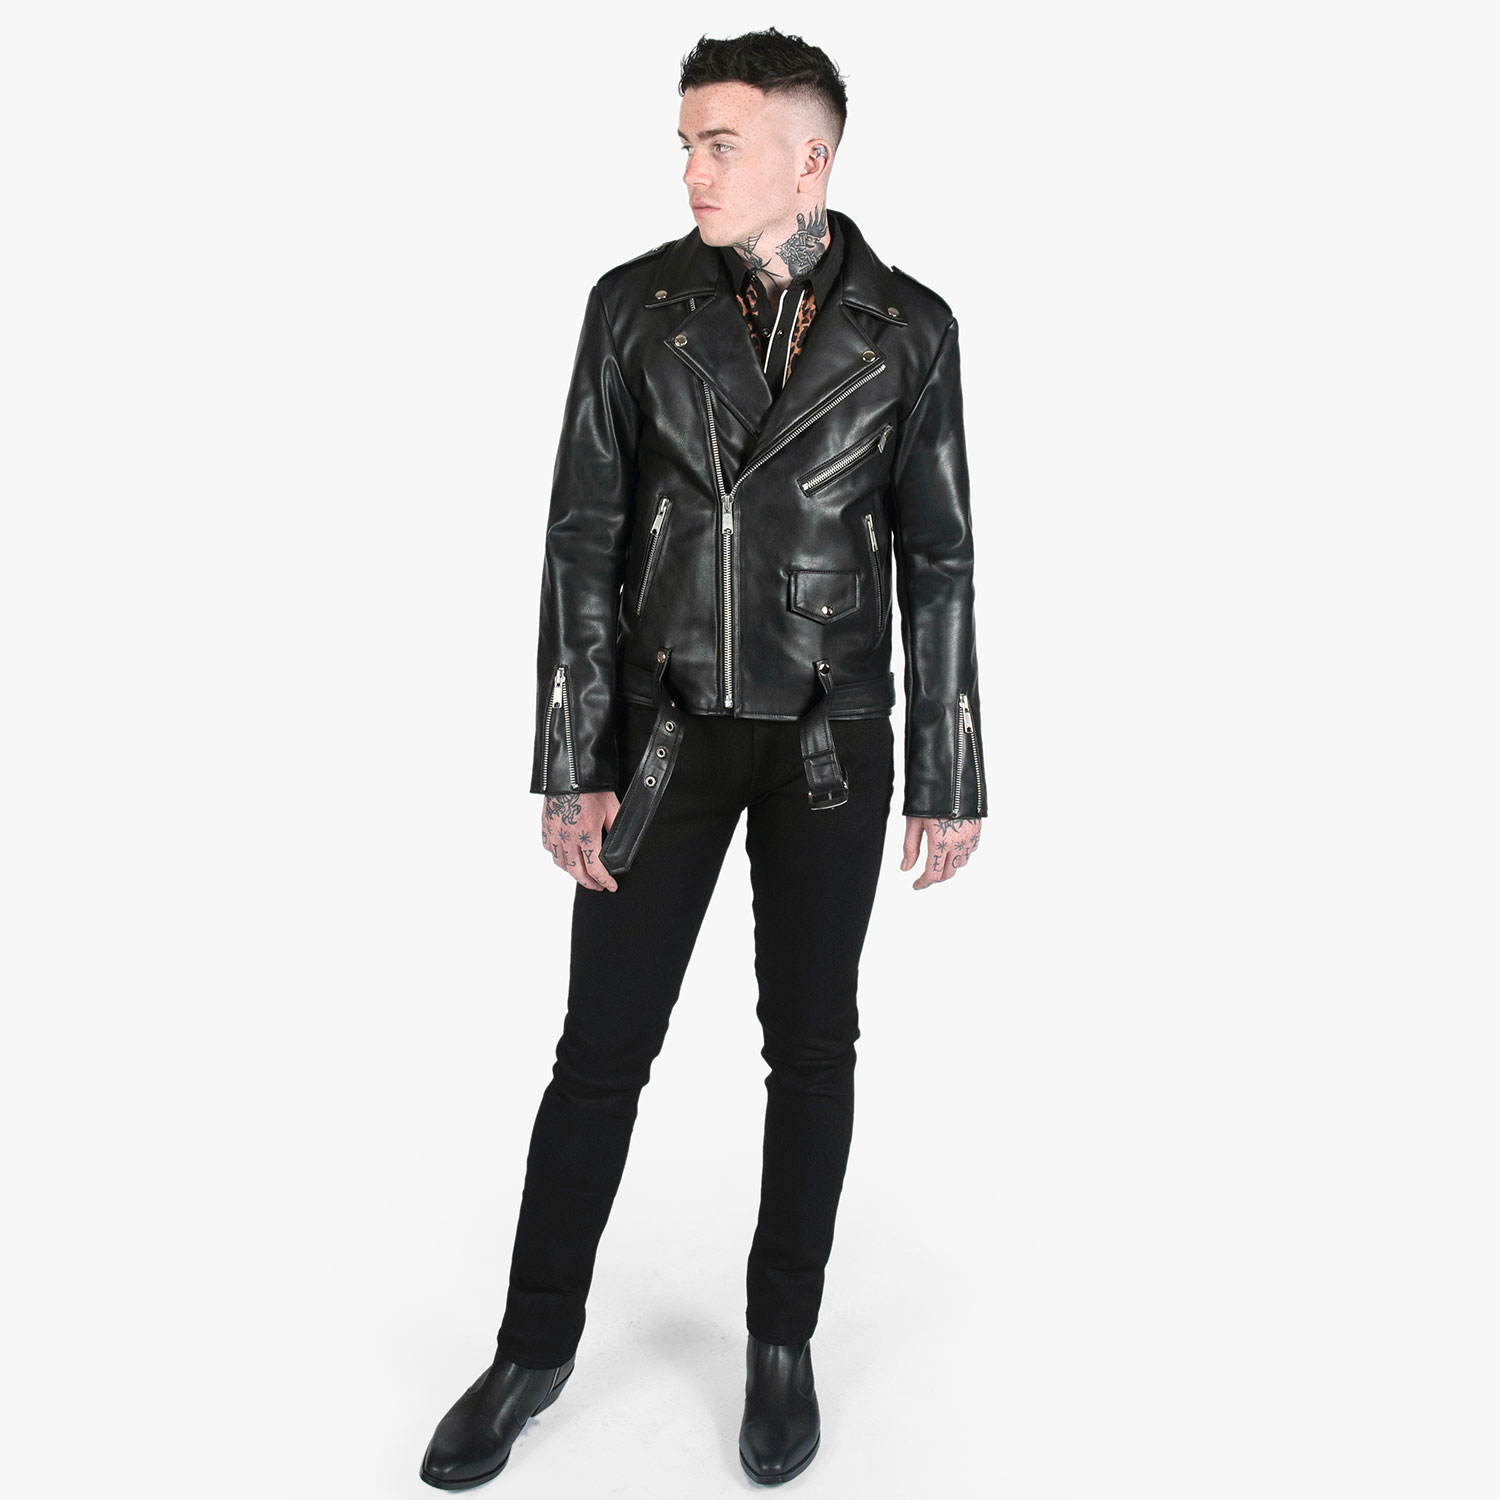 Vegan Commando Long - for Tall Men - Black and Nickel Faux Leather Jacket - Men's by Straight to Hell